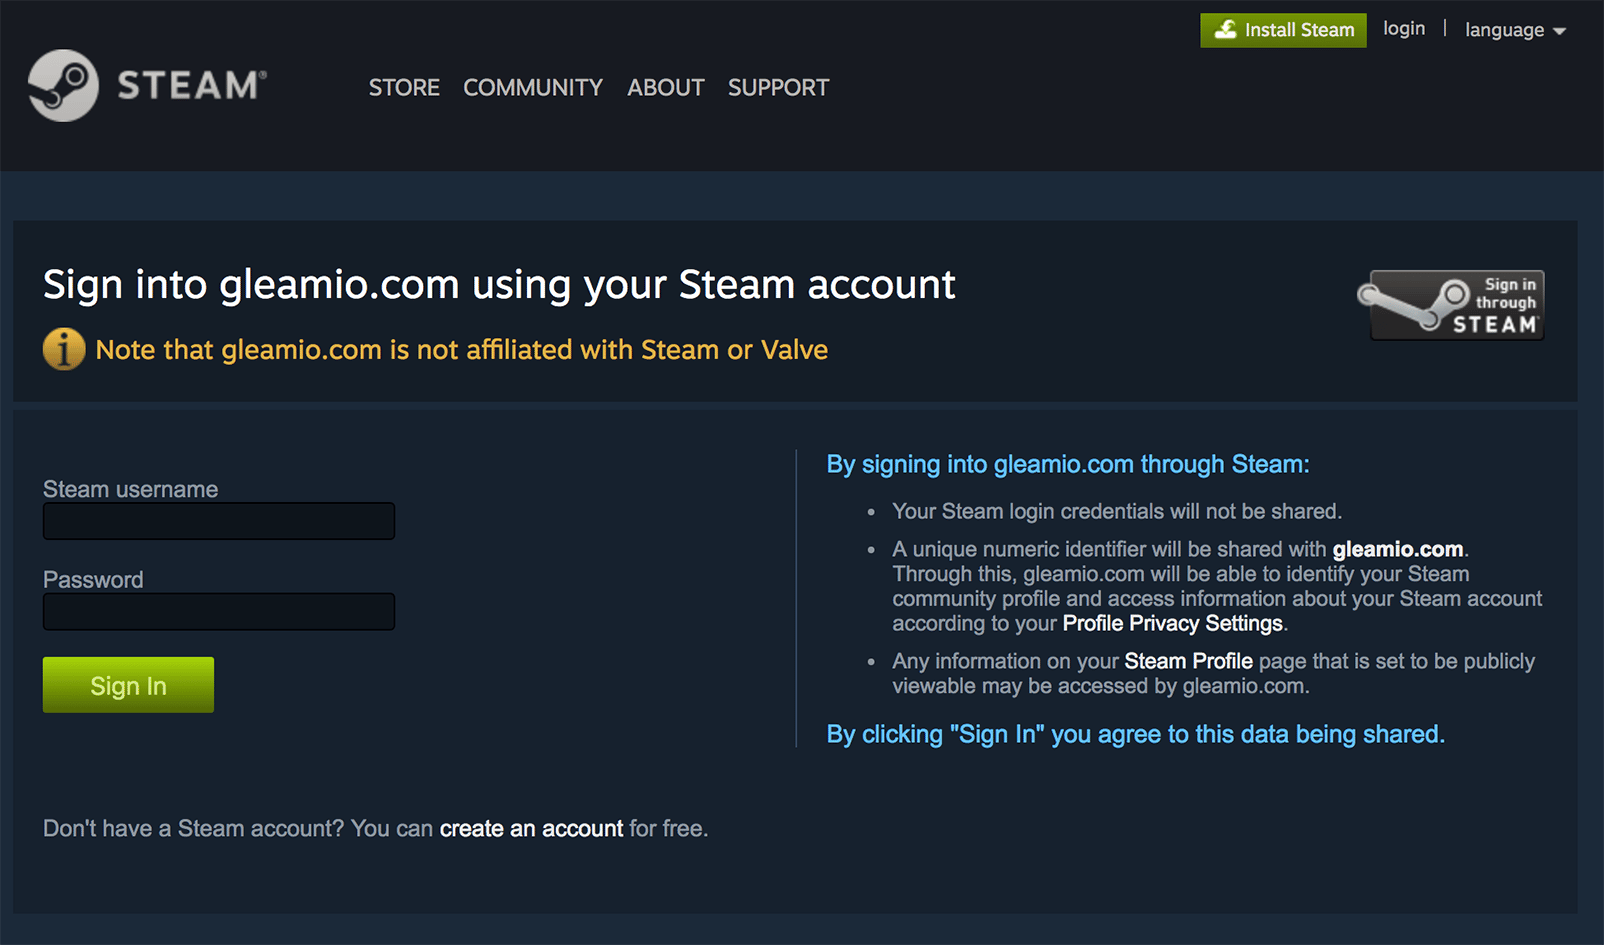 Authenticate your Steam account to connect Gleam.io